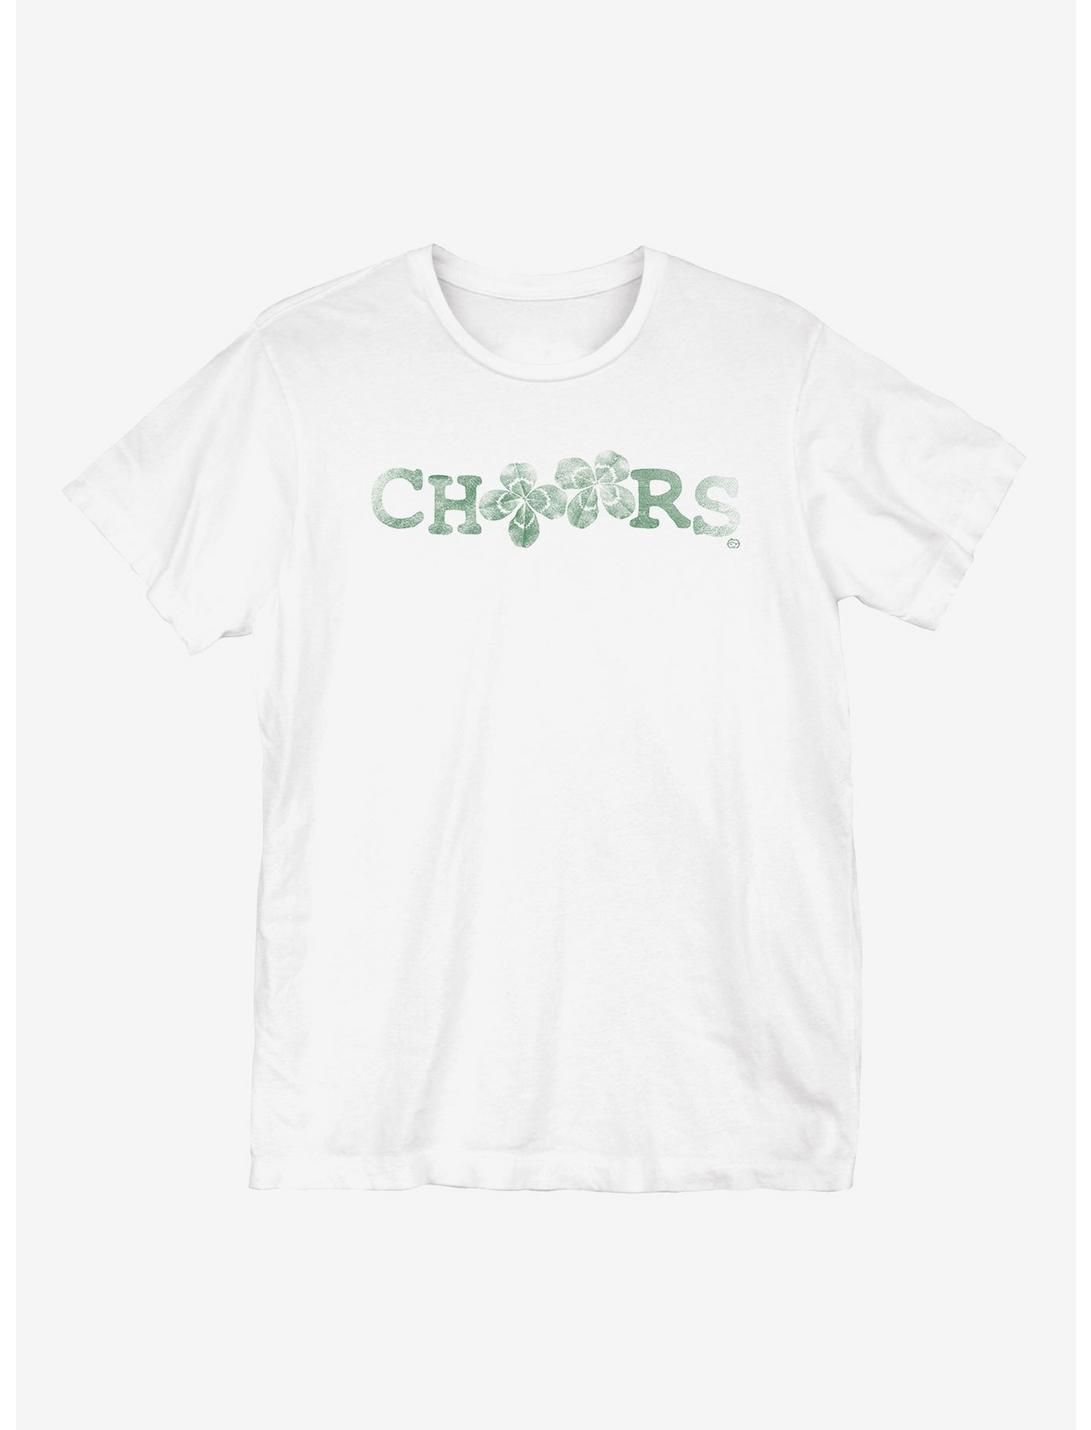 St. Patrick's Day Cheers Luck T-Shirt, WHITE, hi-res